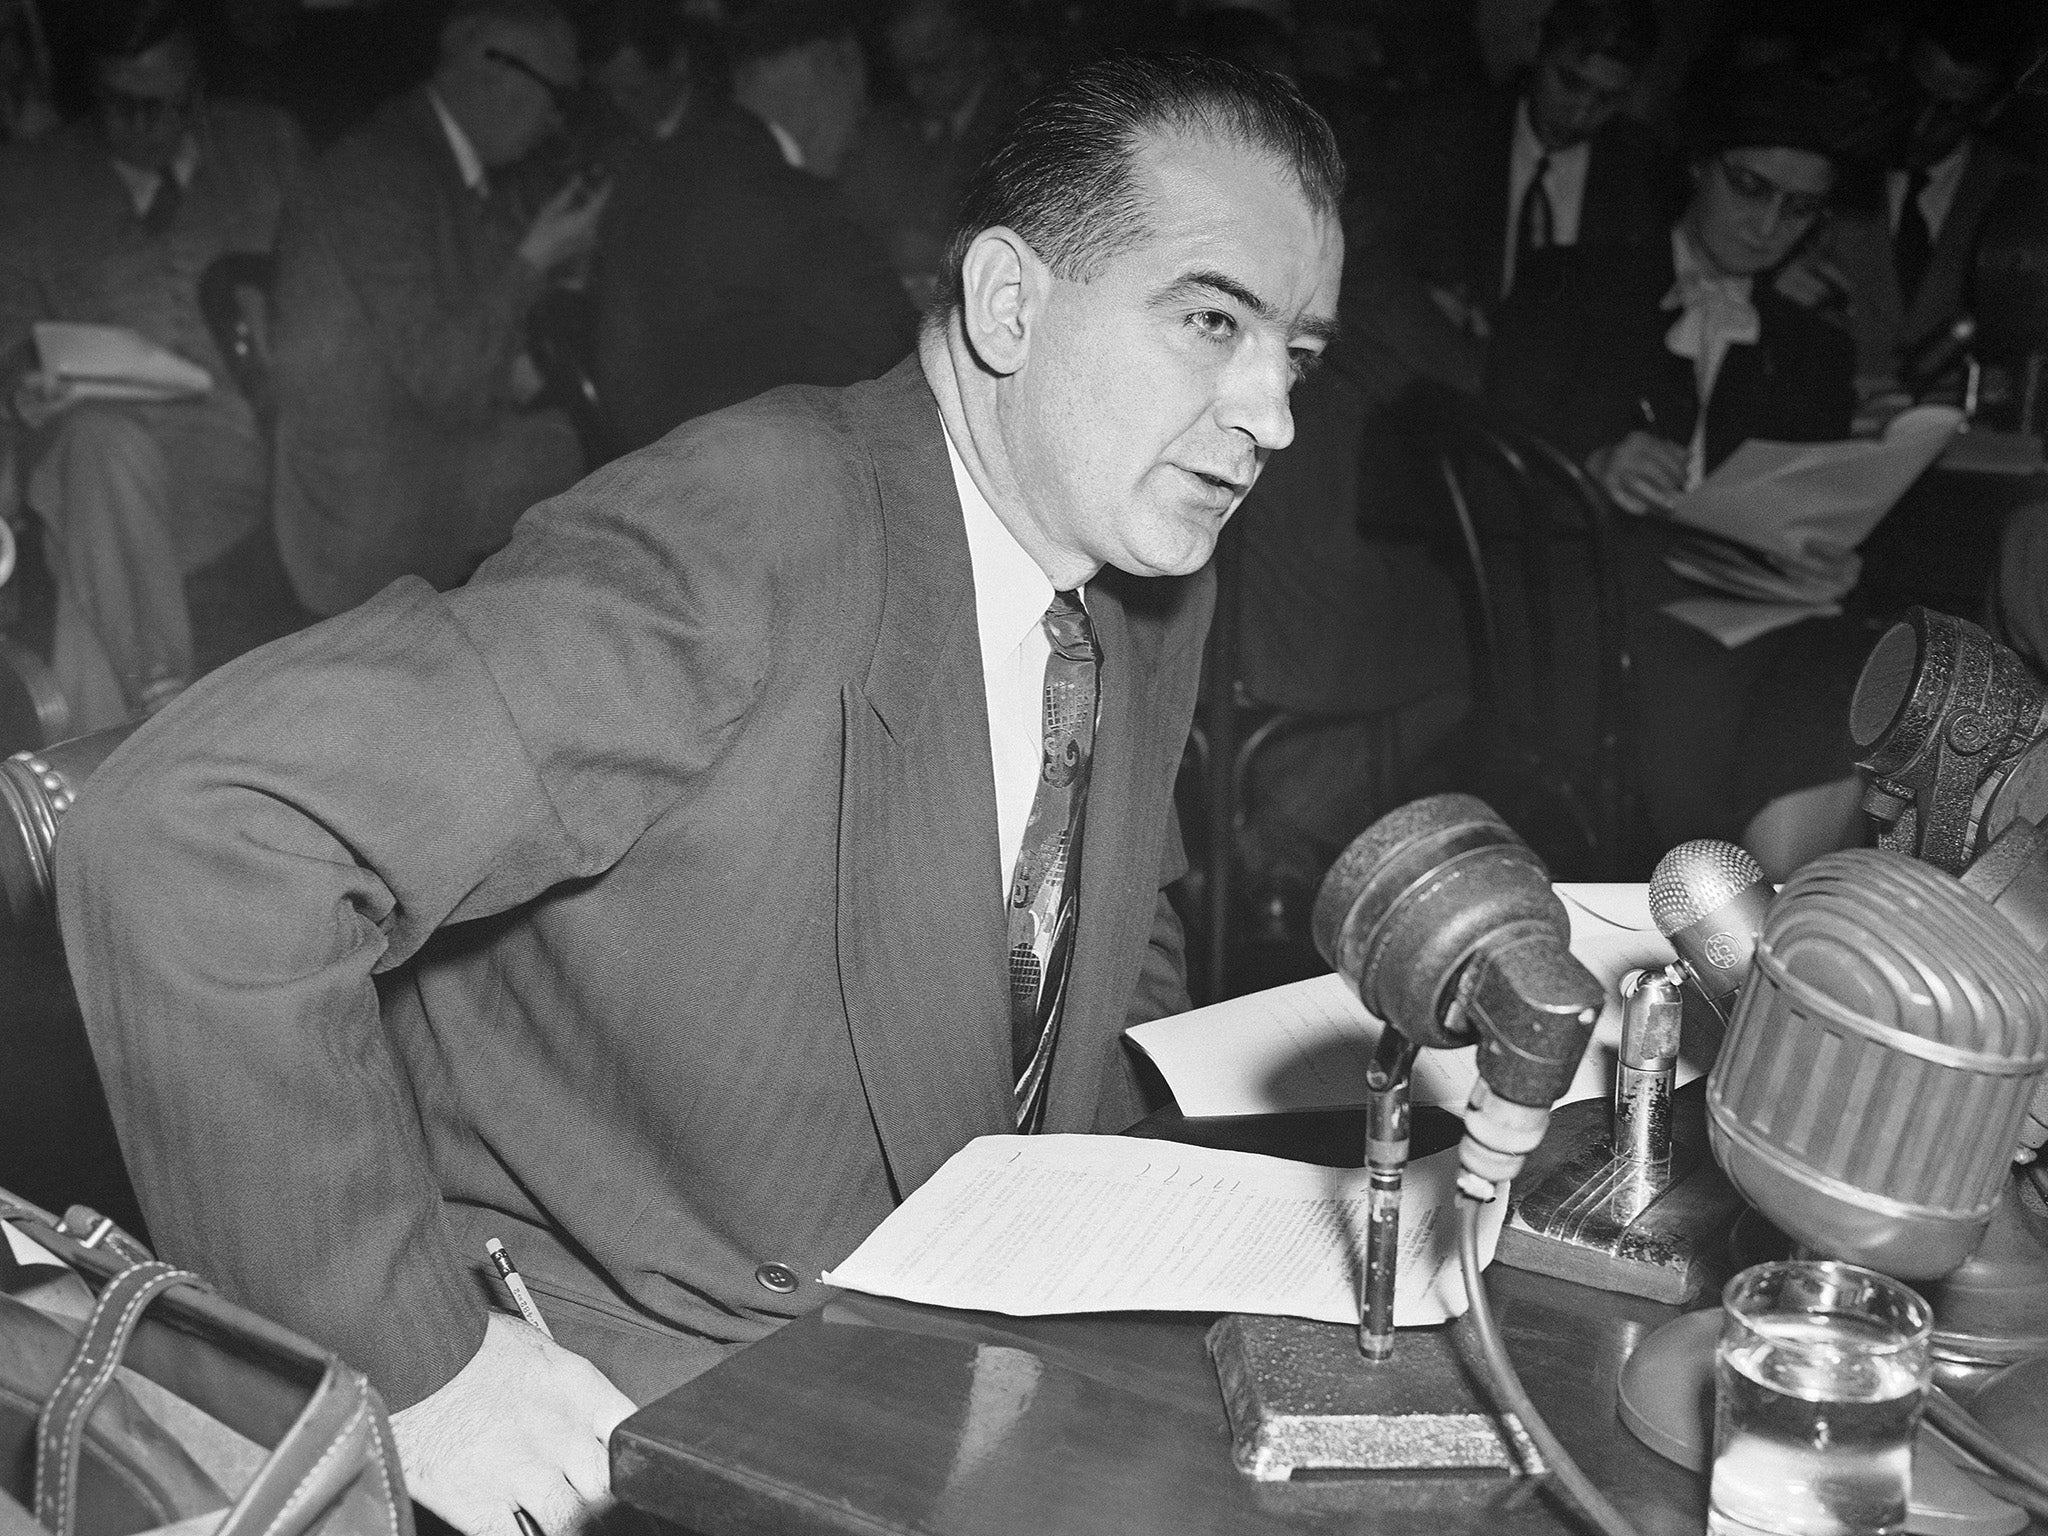 McCarthy used similar techniques to Trump to focus public attention on himself in the 1950s